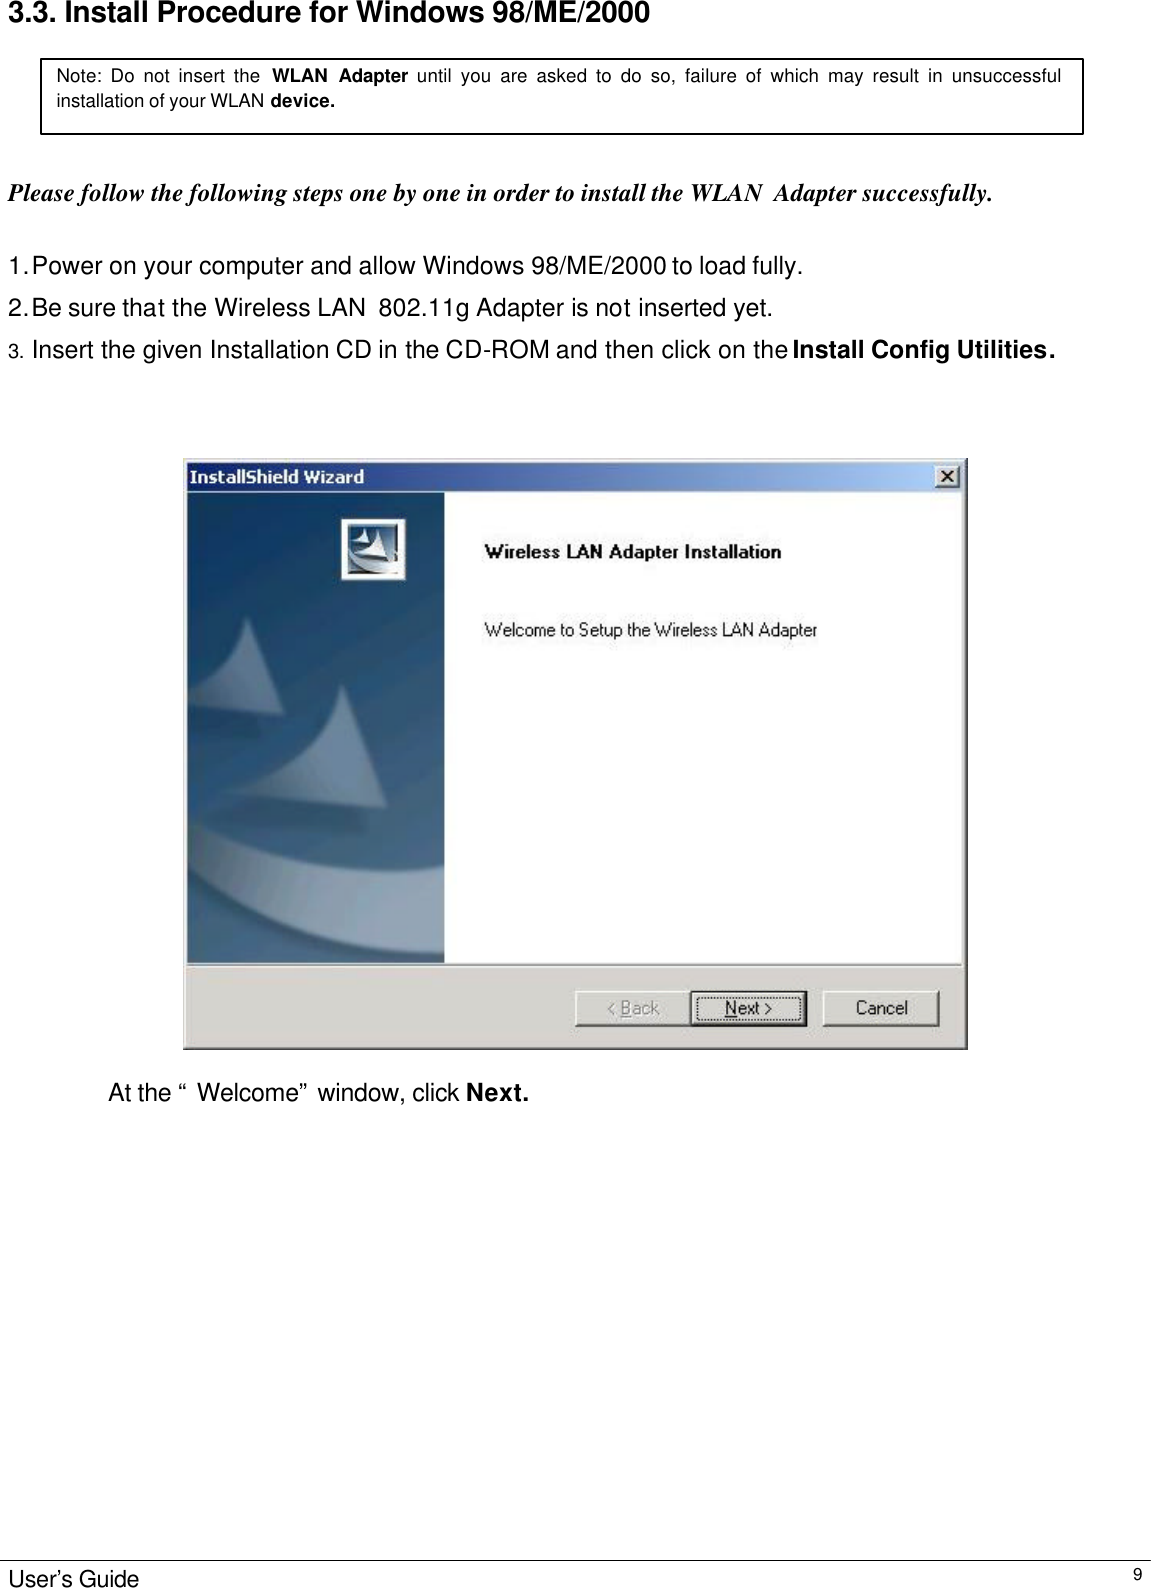                                                                                                                                                                                                                                                                                    User’s Guide  9 3.3. Install Procedure for Windows 98/ME/2000    Please follow the following steps one by one in order to install the WLAN  Adapter successfully.  1. Power on your computer and allow Windows 98/ME/2000 to load fully. 2. Be sure that the Wireless LAN  802.11g Adapter is not inserted yet.  3. Insert the given Installation CD in the CD-ROM and then click on the Install Config Utilities.     At the “ Welcome” window, click Next.         Note: Do not insert the WLAN Adapter until you are asked to do so, failure of which may result in unsuccessful installation of your WLAN device. 